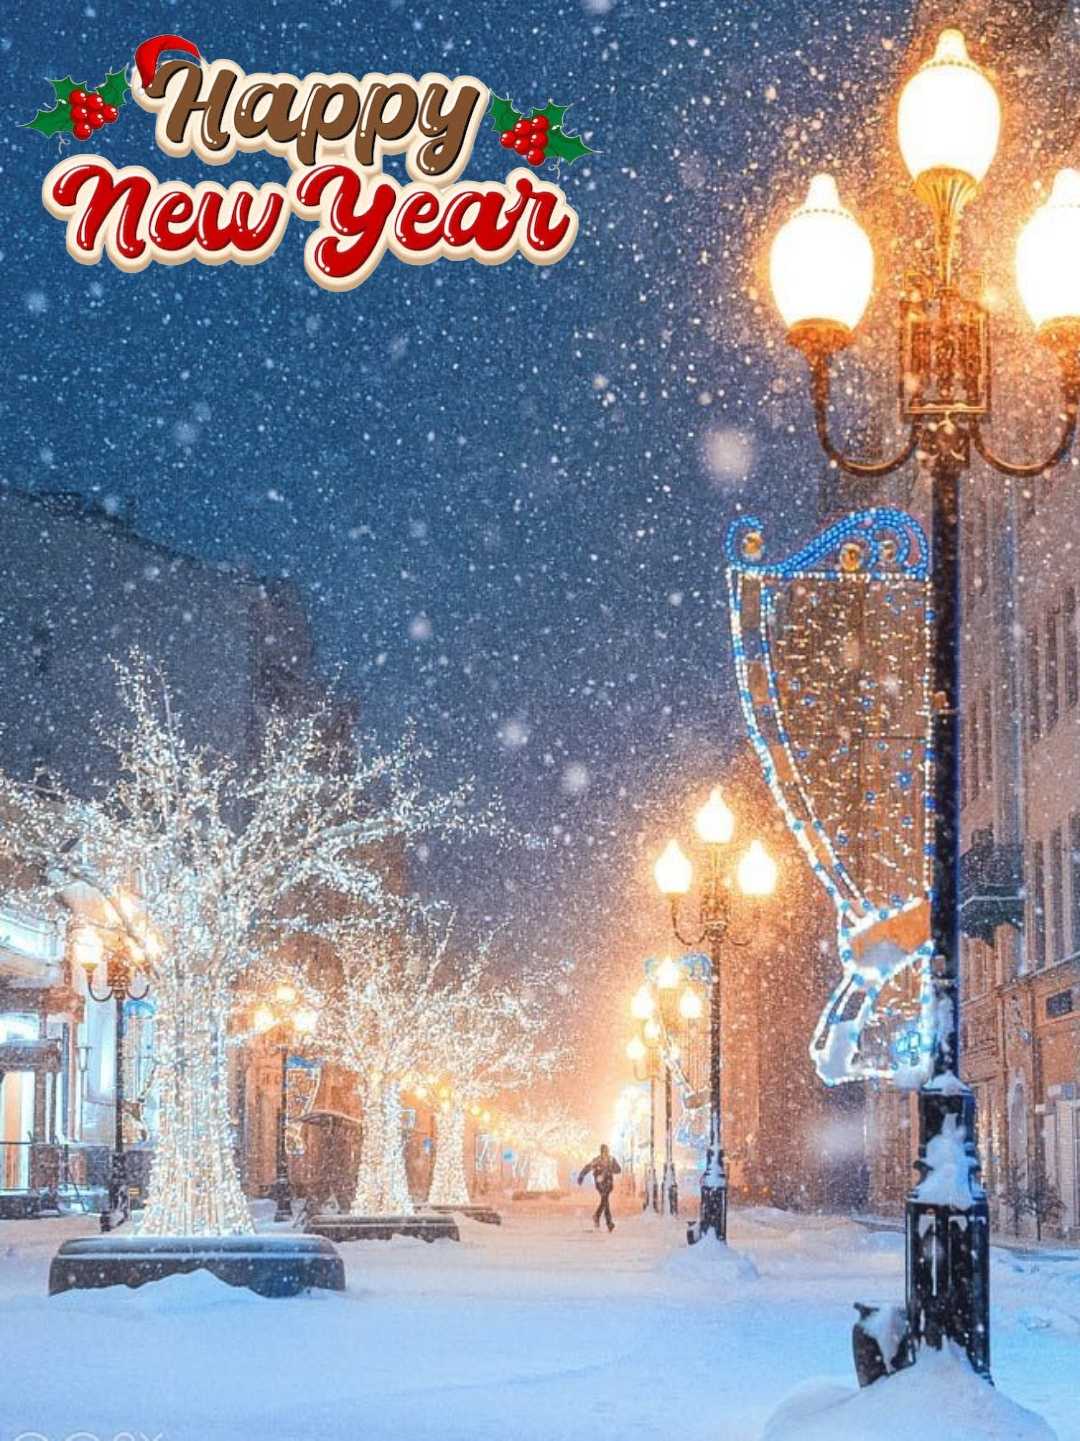 New year editing background hd